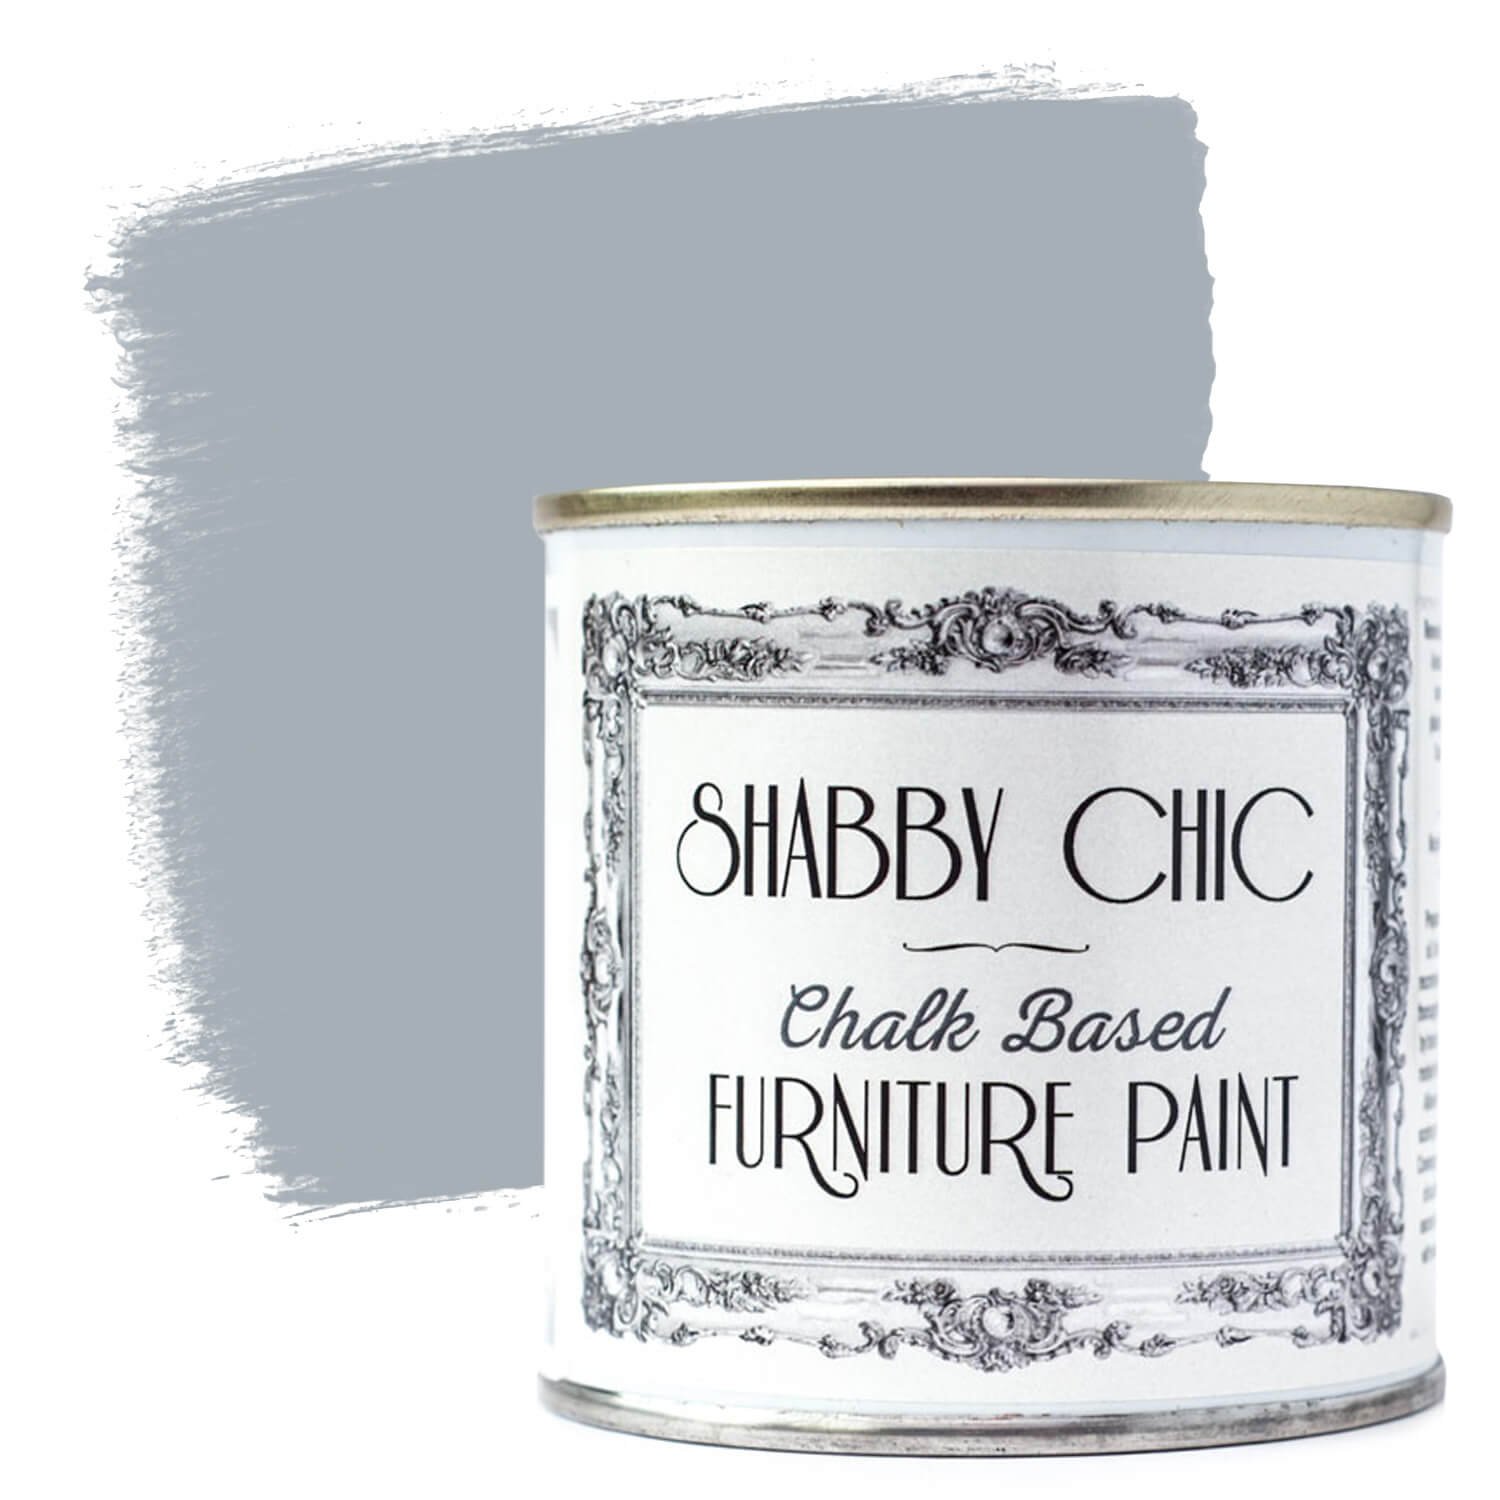 Shabby Chic Furniture Paint in Grey Embrace